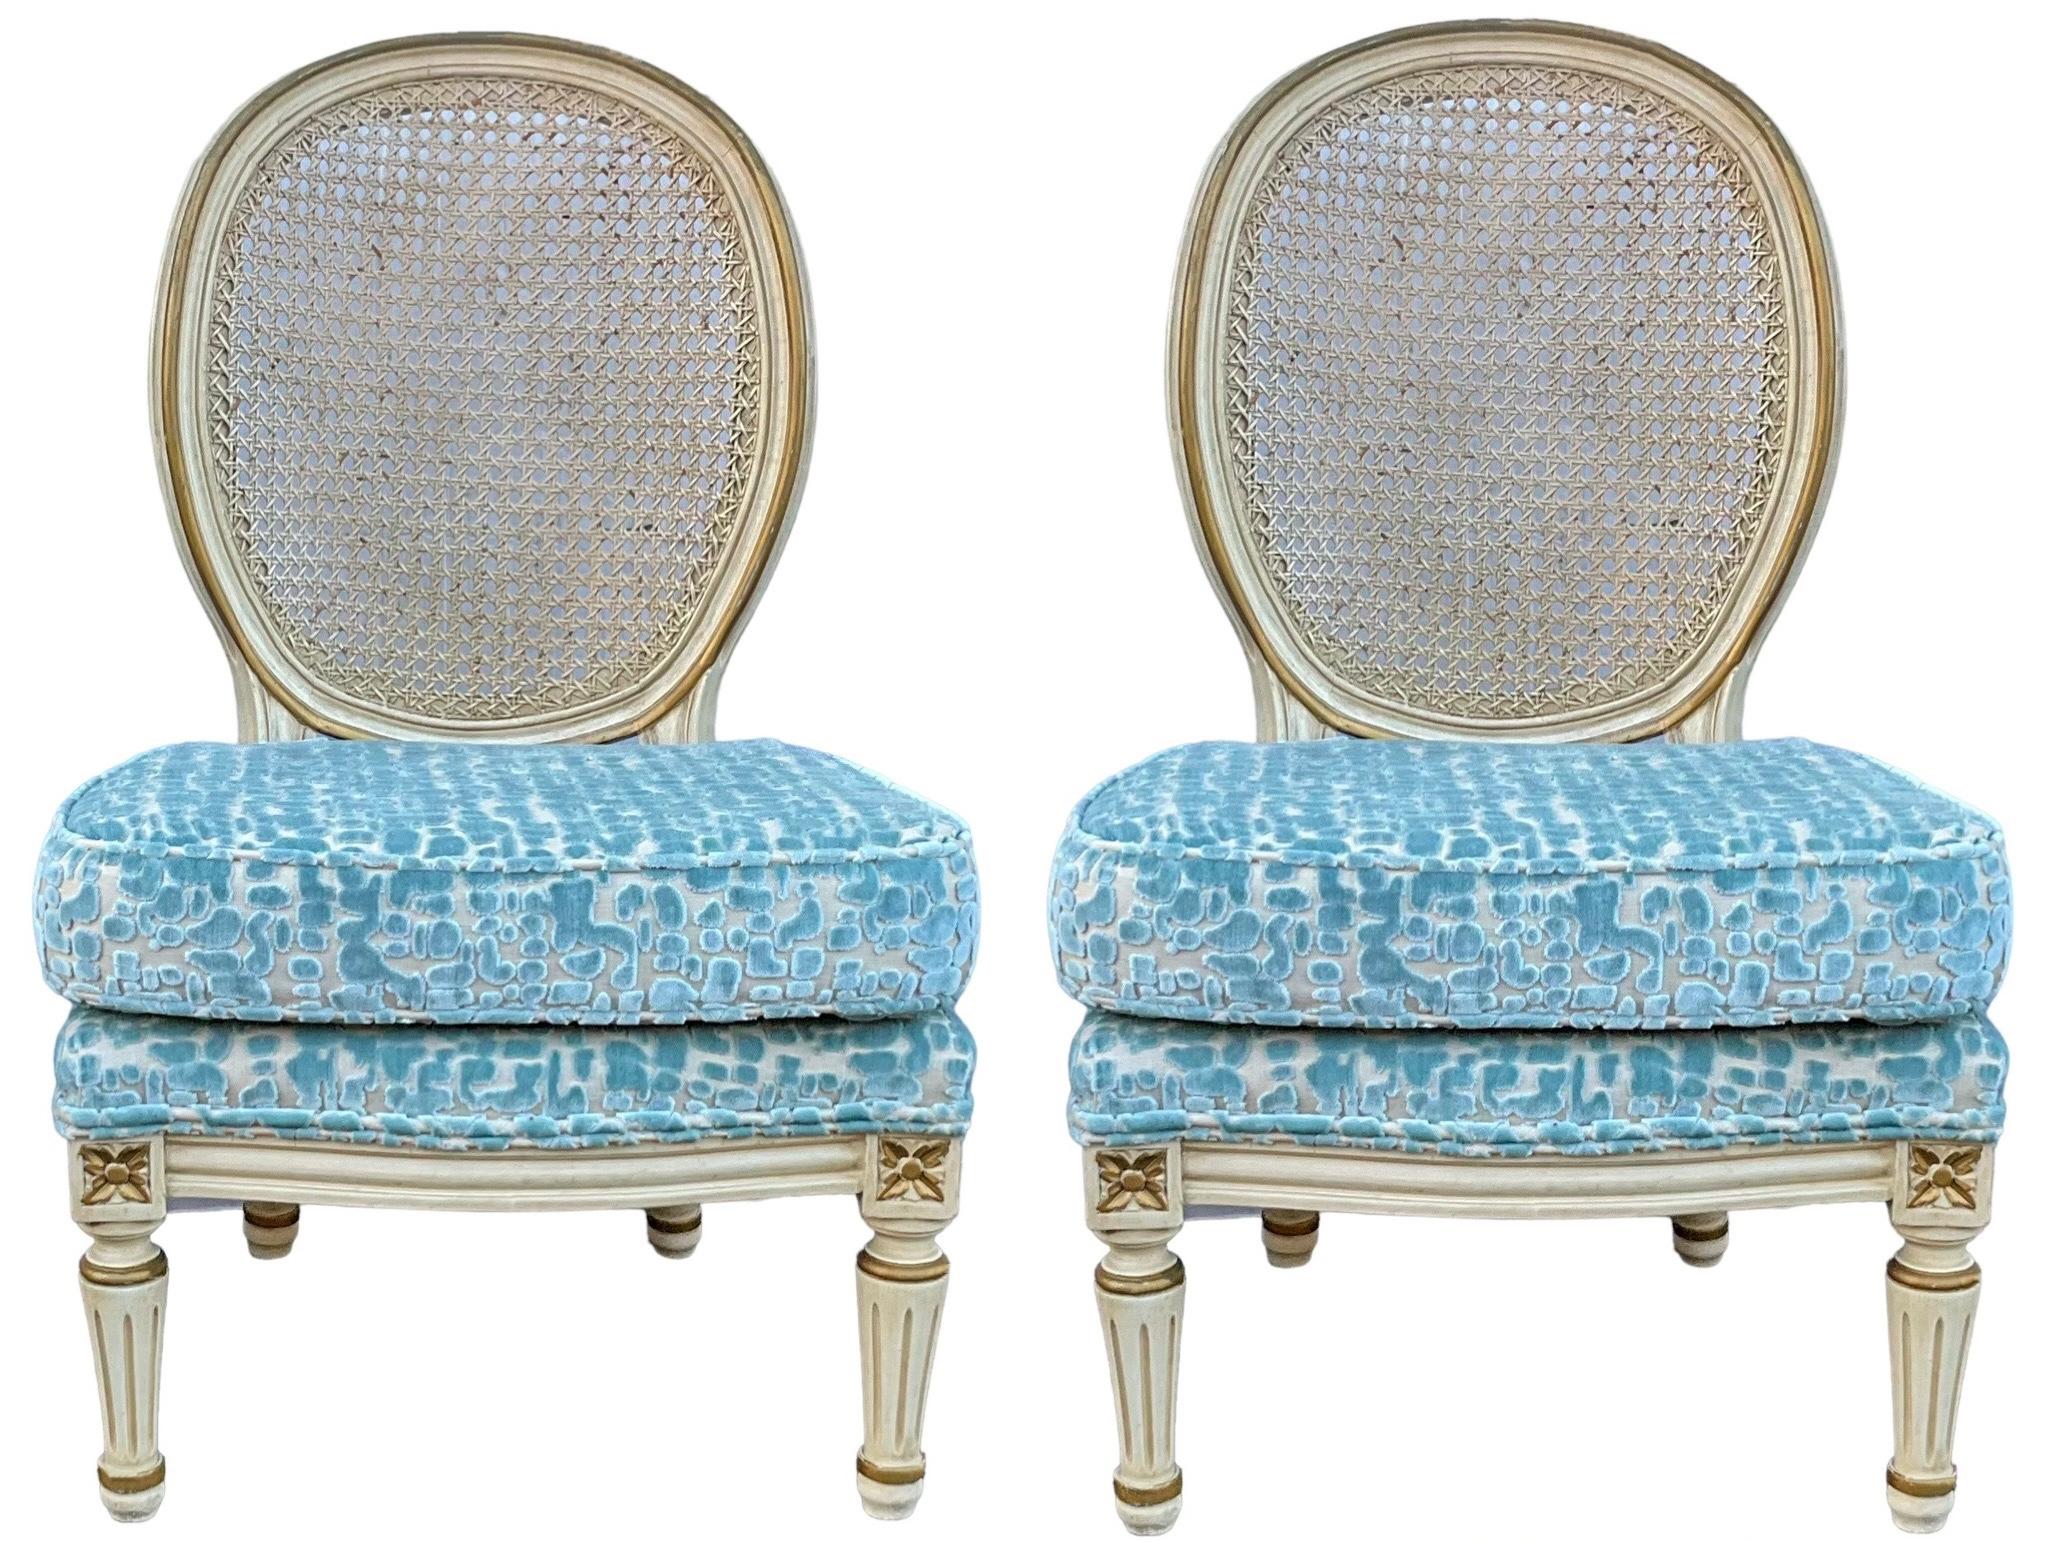 Hollywood Regency Era French Style Painted Slipper Chairs In Cut Velvet -Pair 1